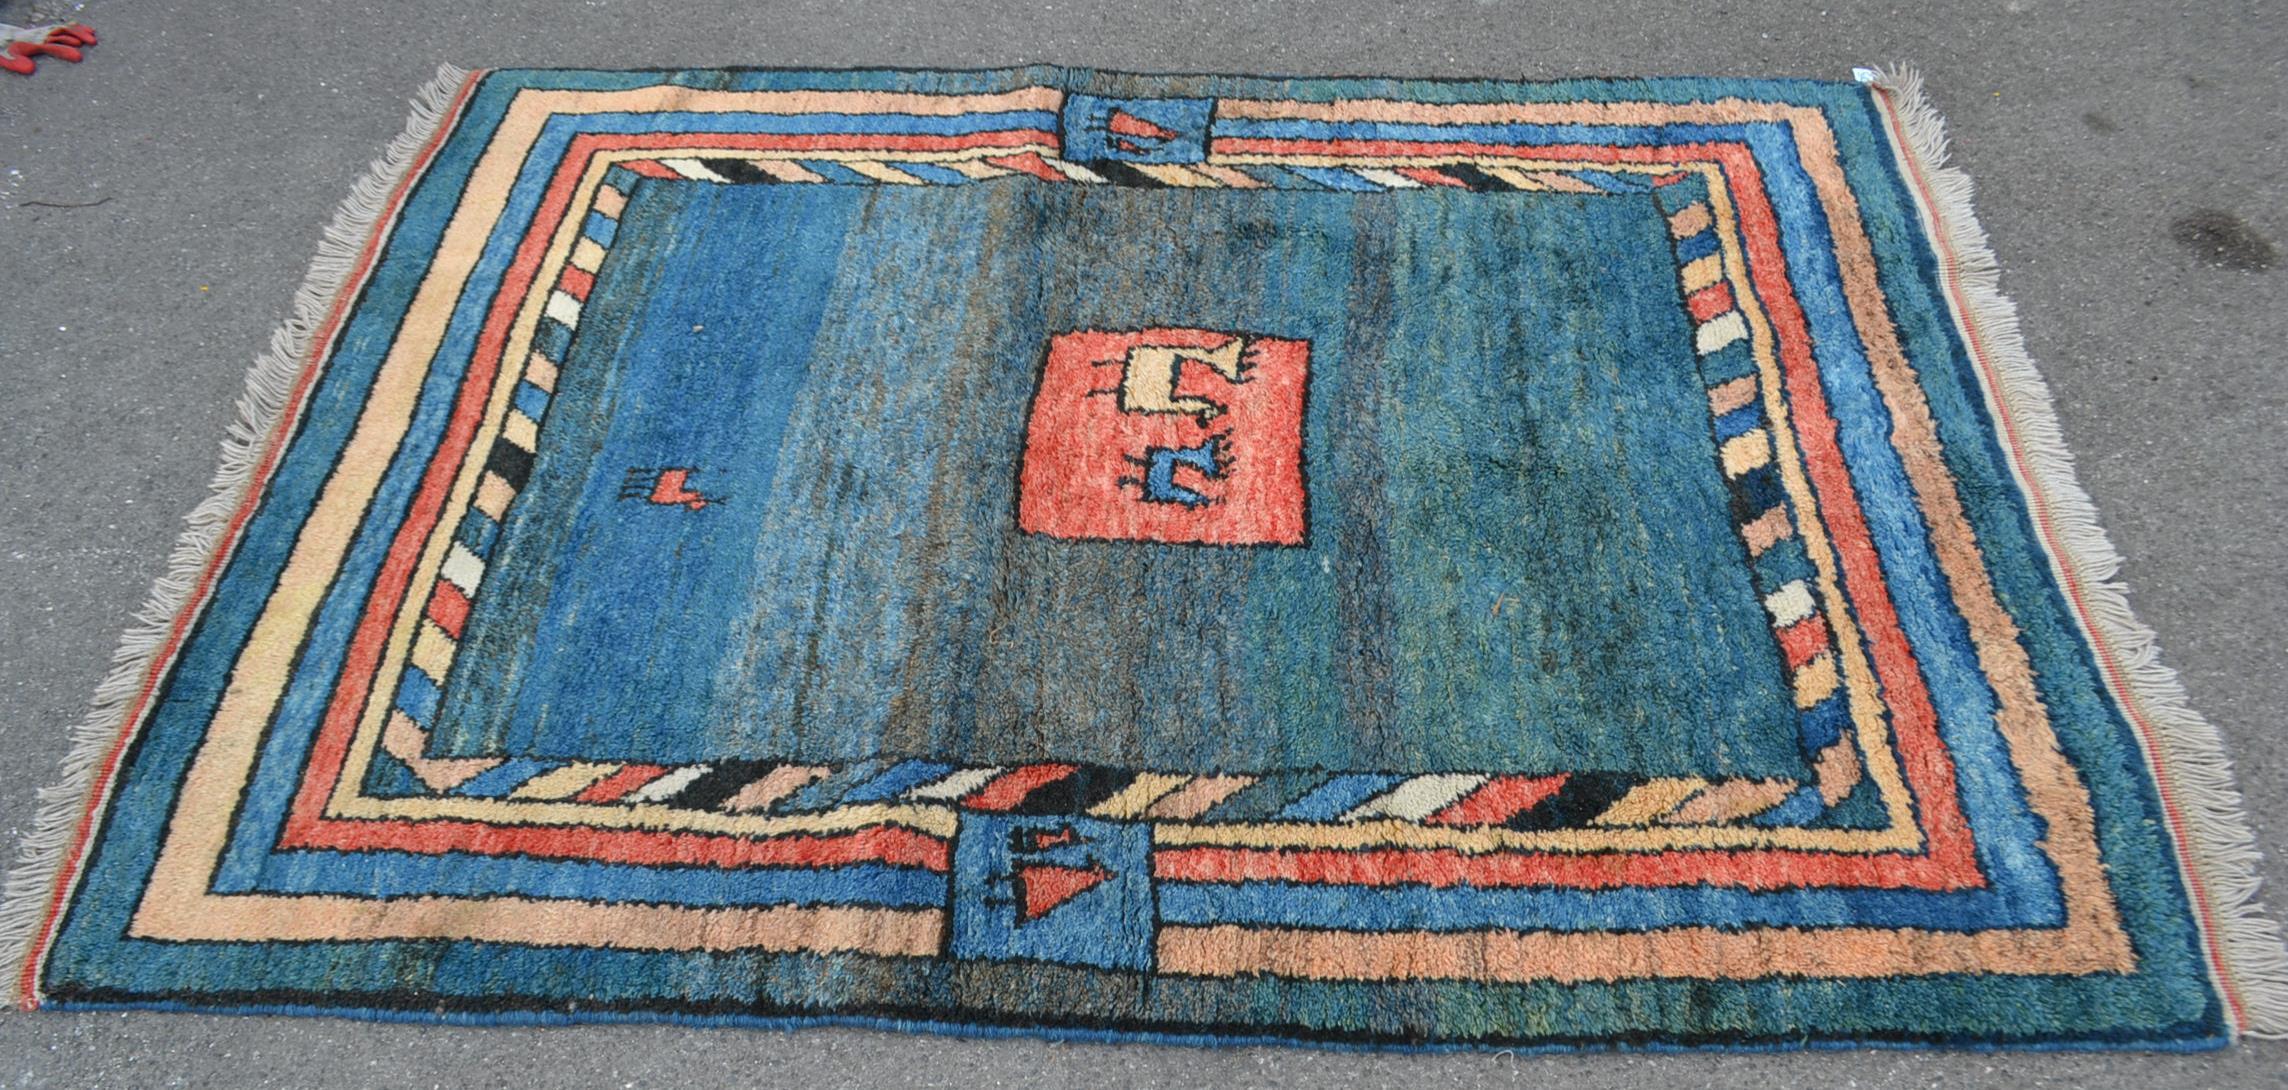 A 20th century thick pile alpaca woolen rug with a